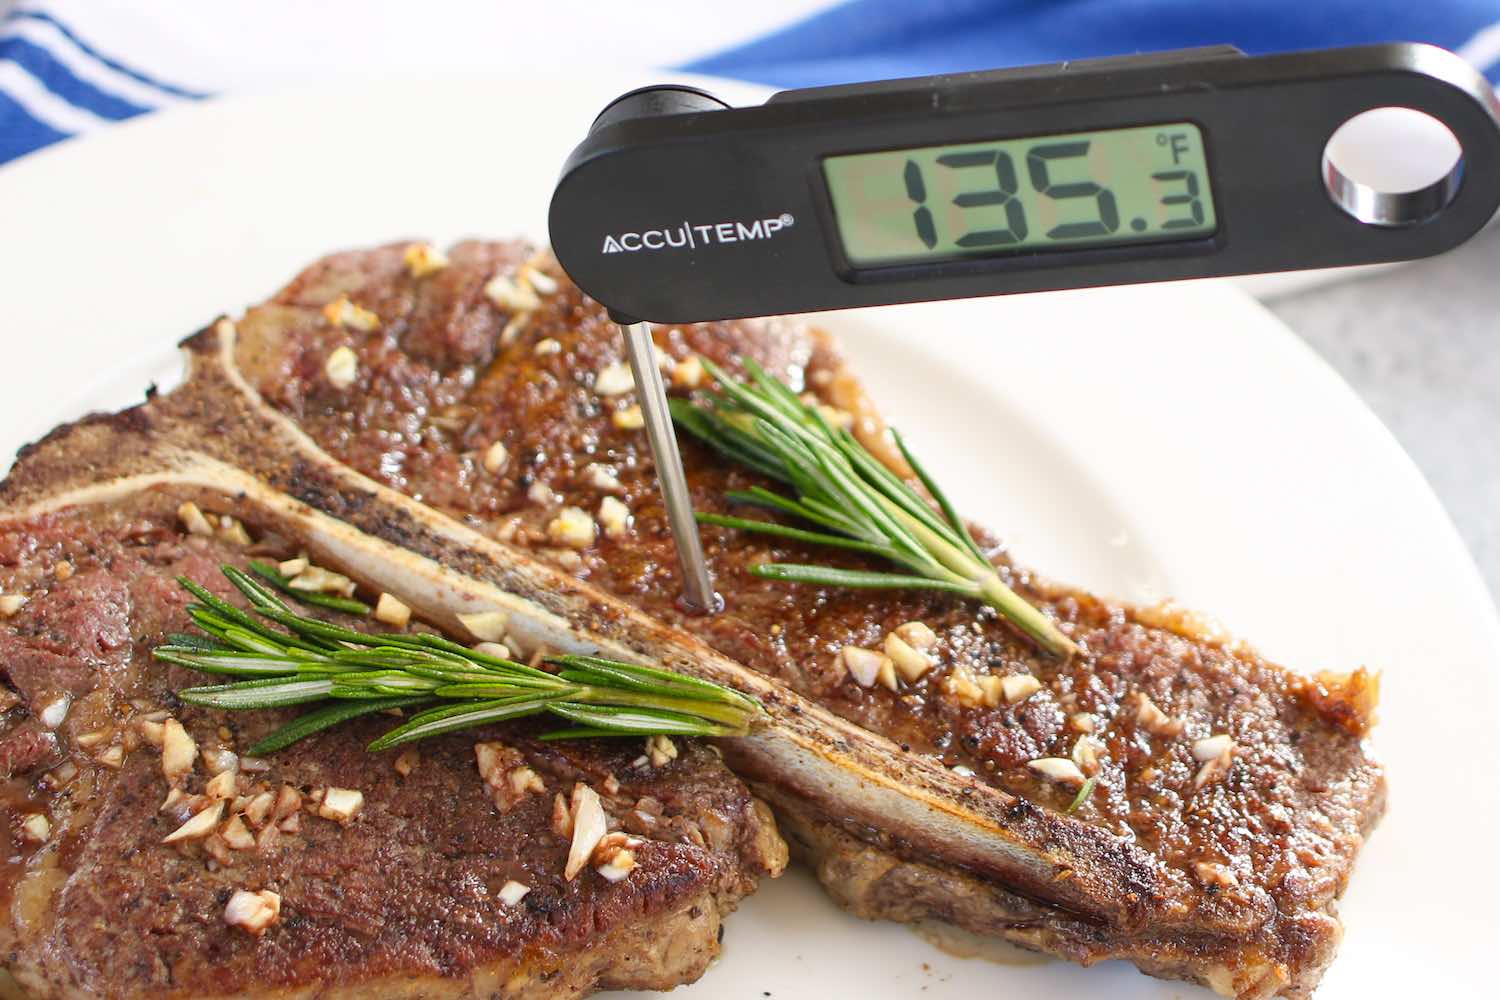 Check steak doneness is by inserting an instant-read thermometer into the middle of the steak